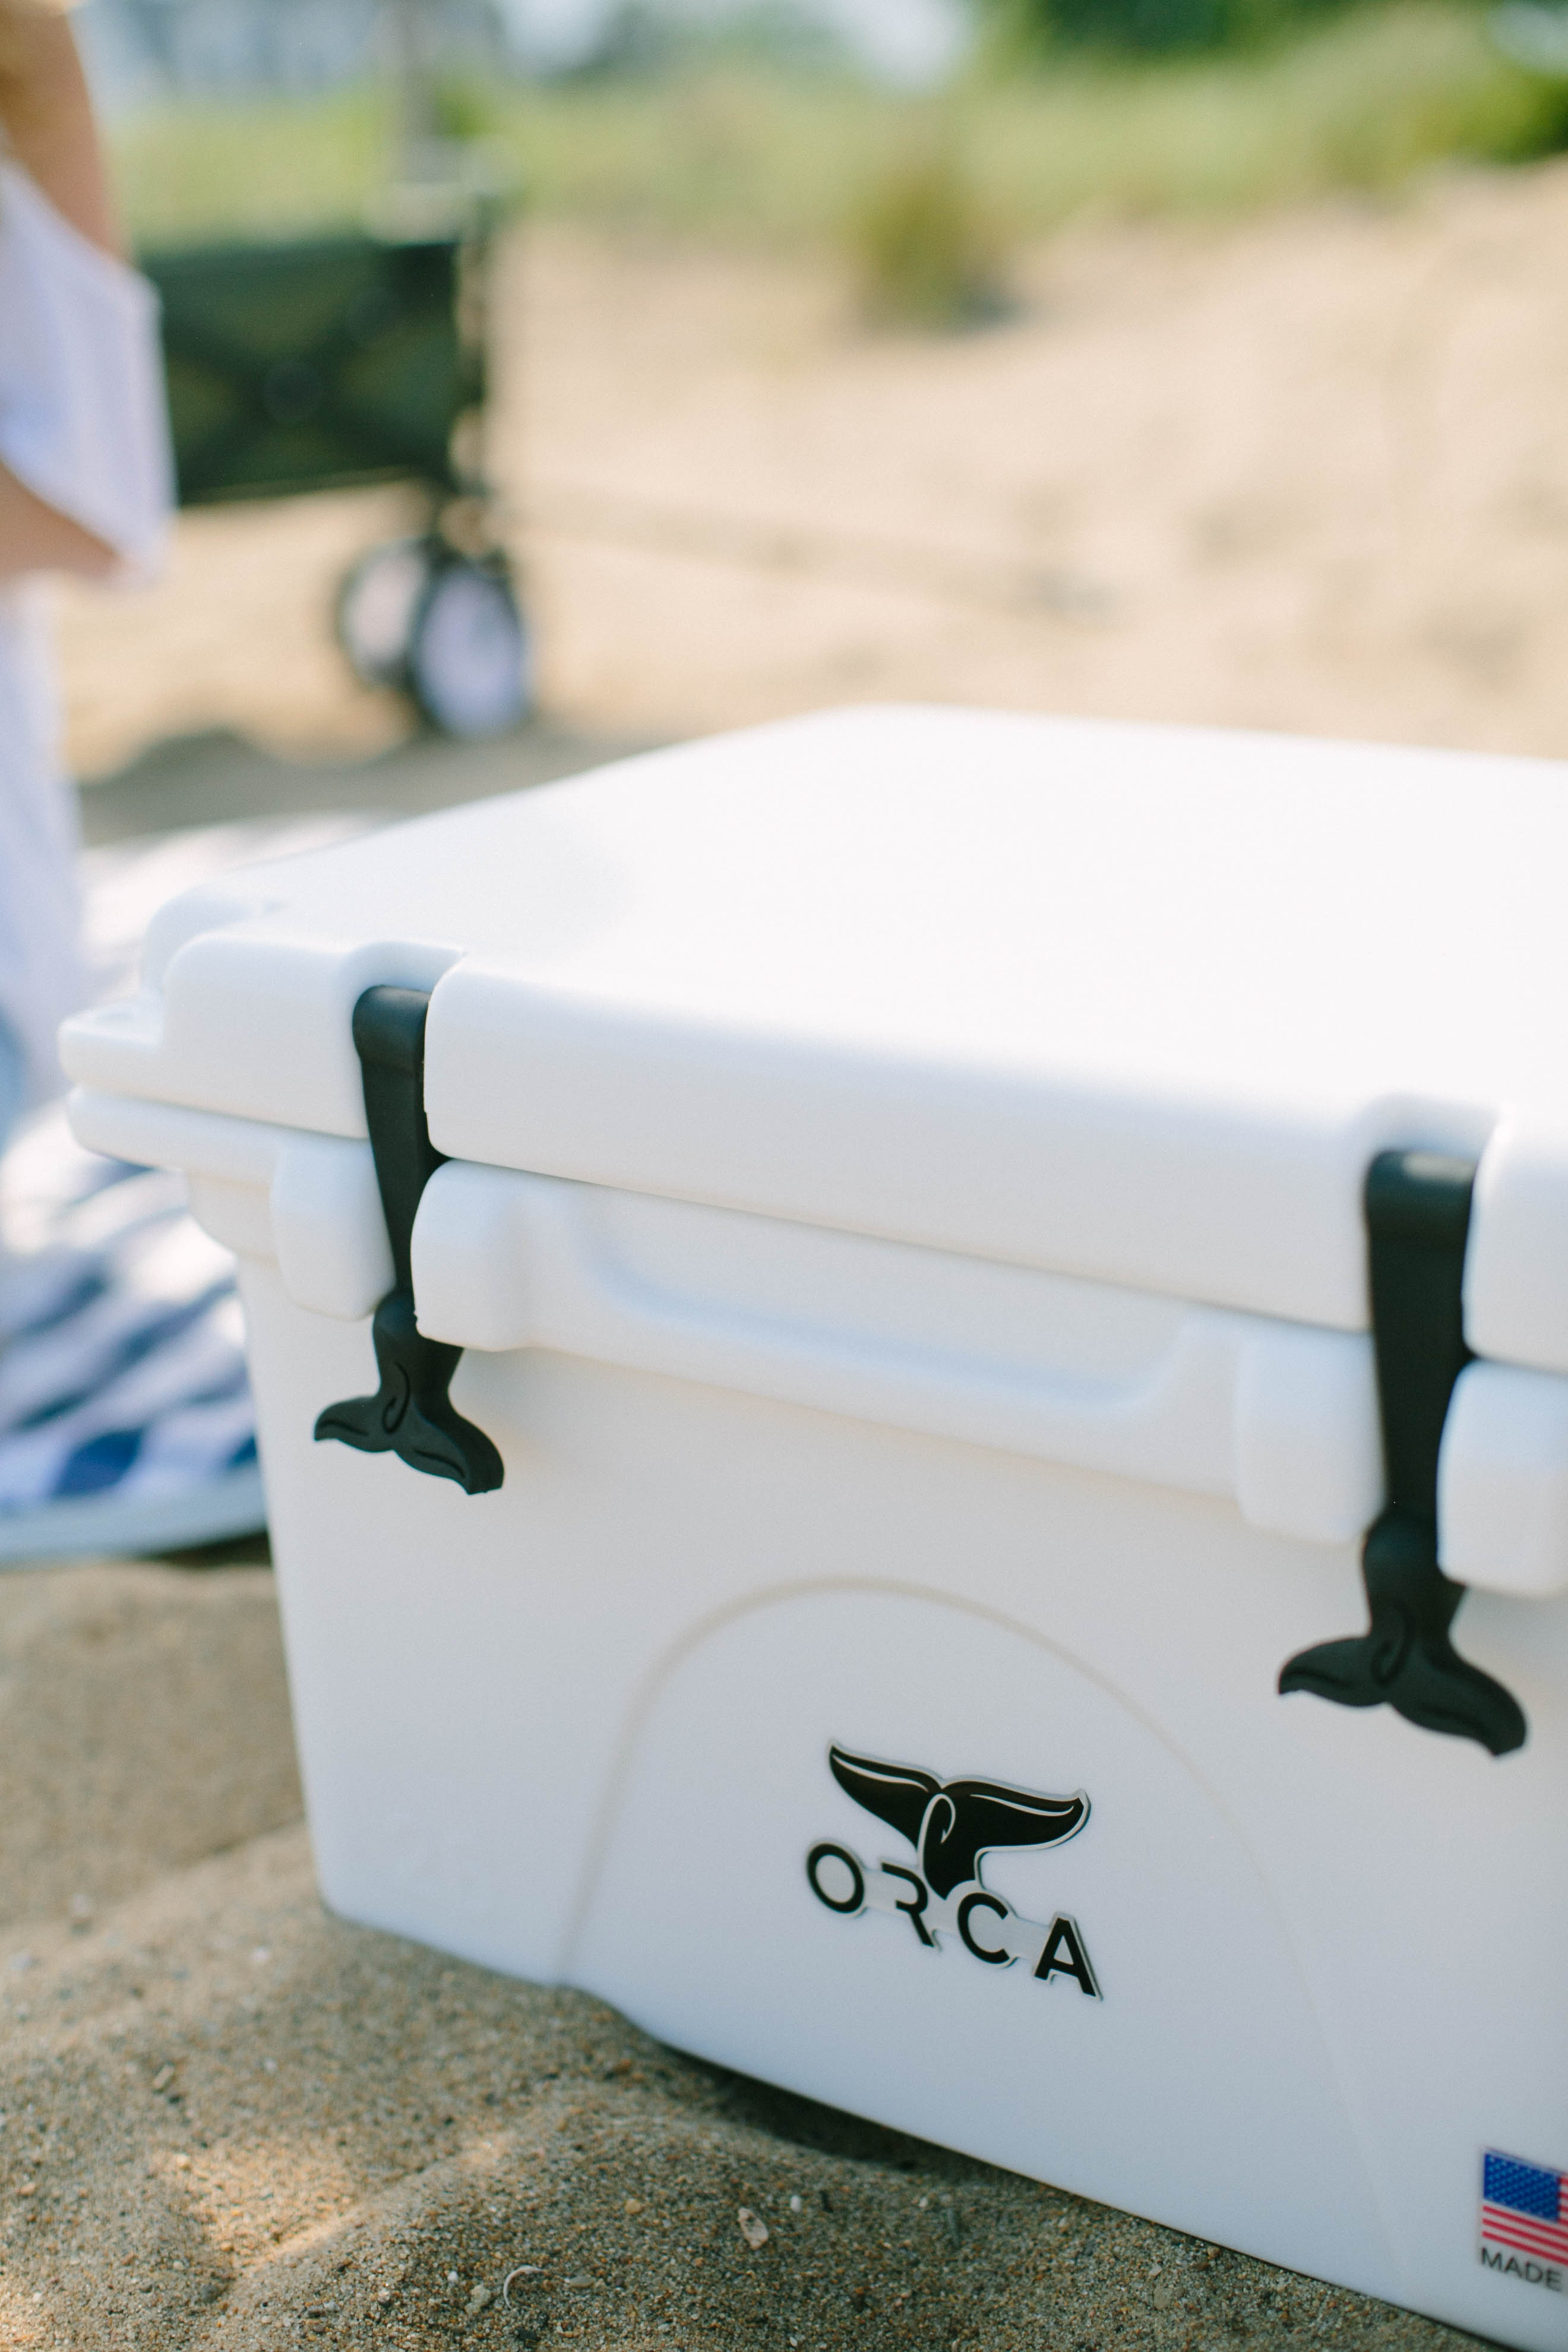 Heading to the beach with the kids? Check out these Summer Beach Picnic Essentials for items that will make things go a little smoother!